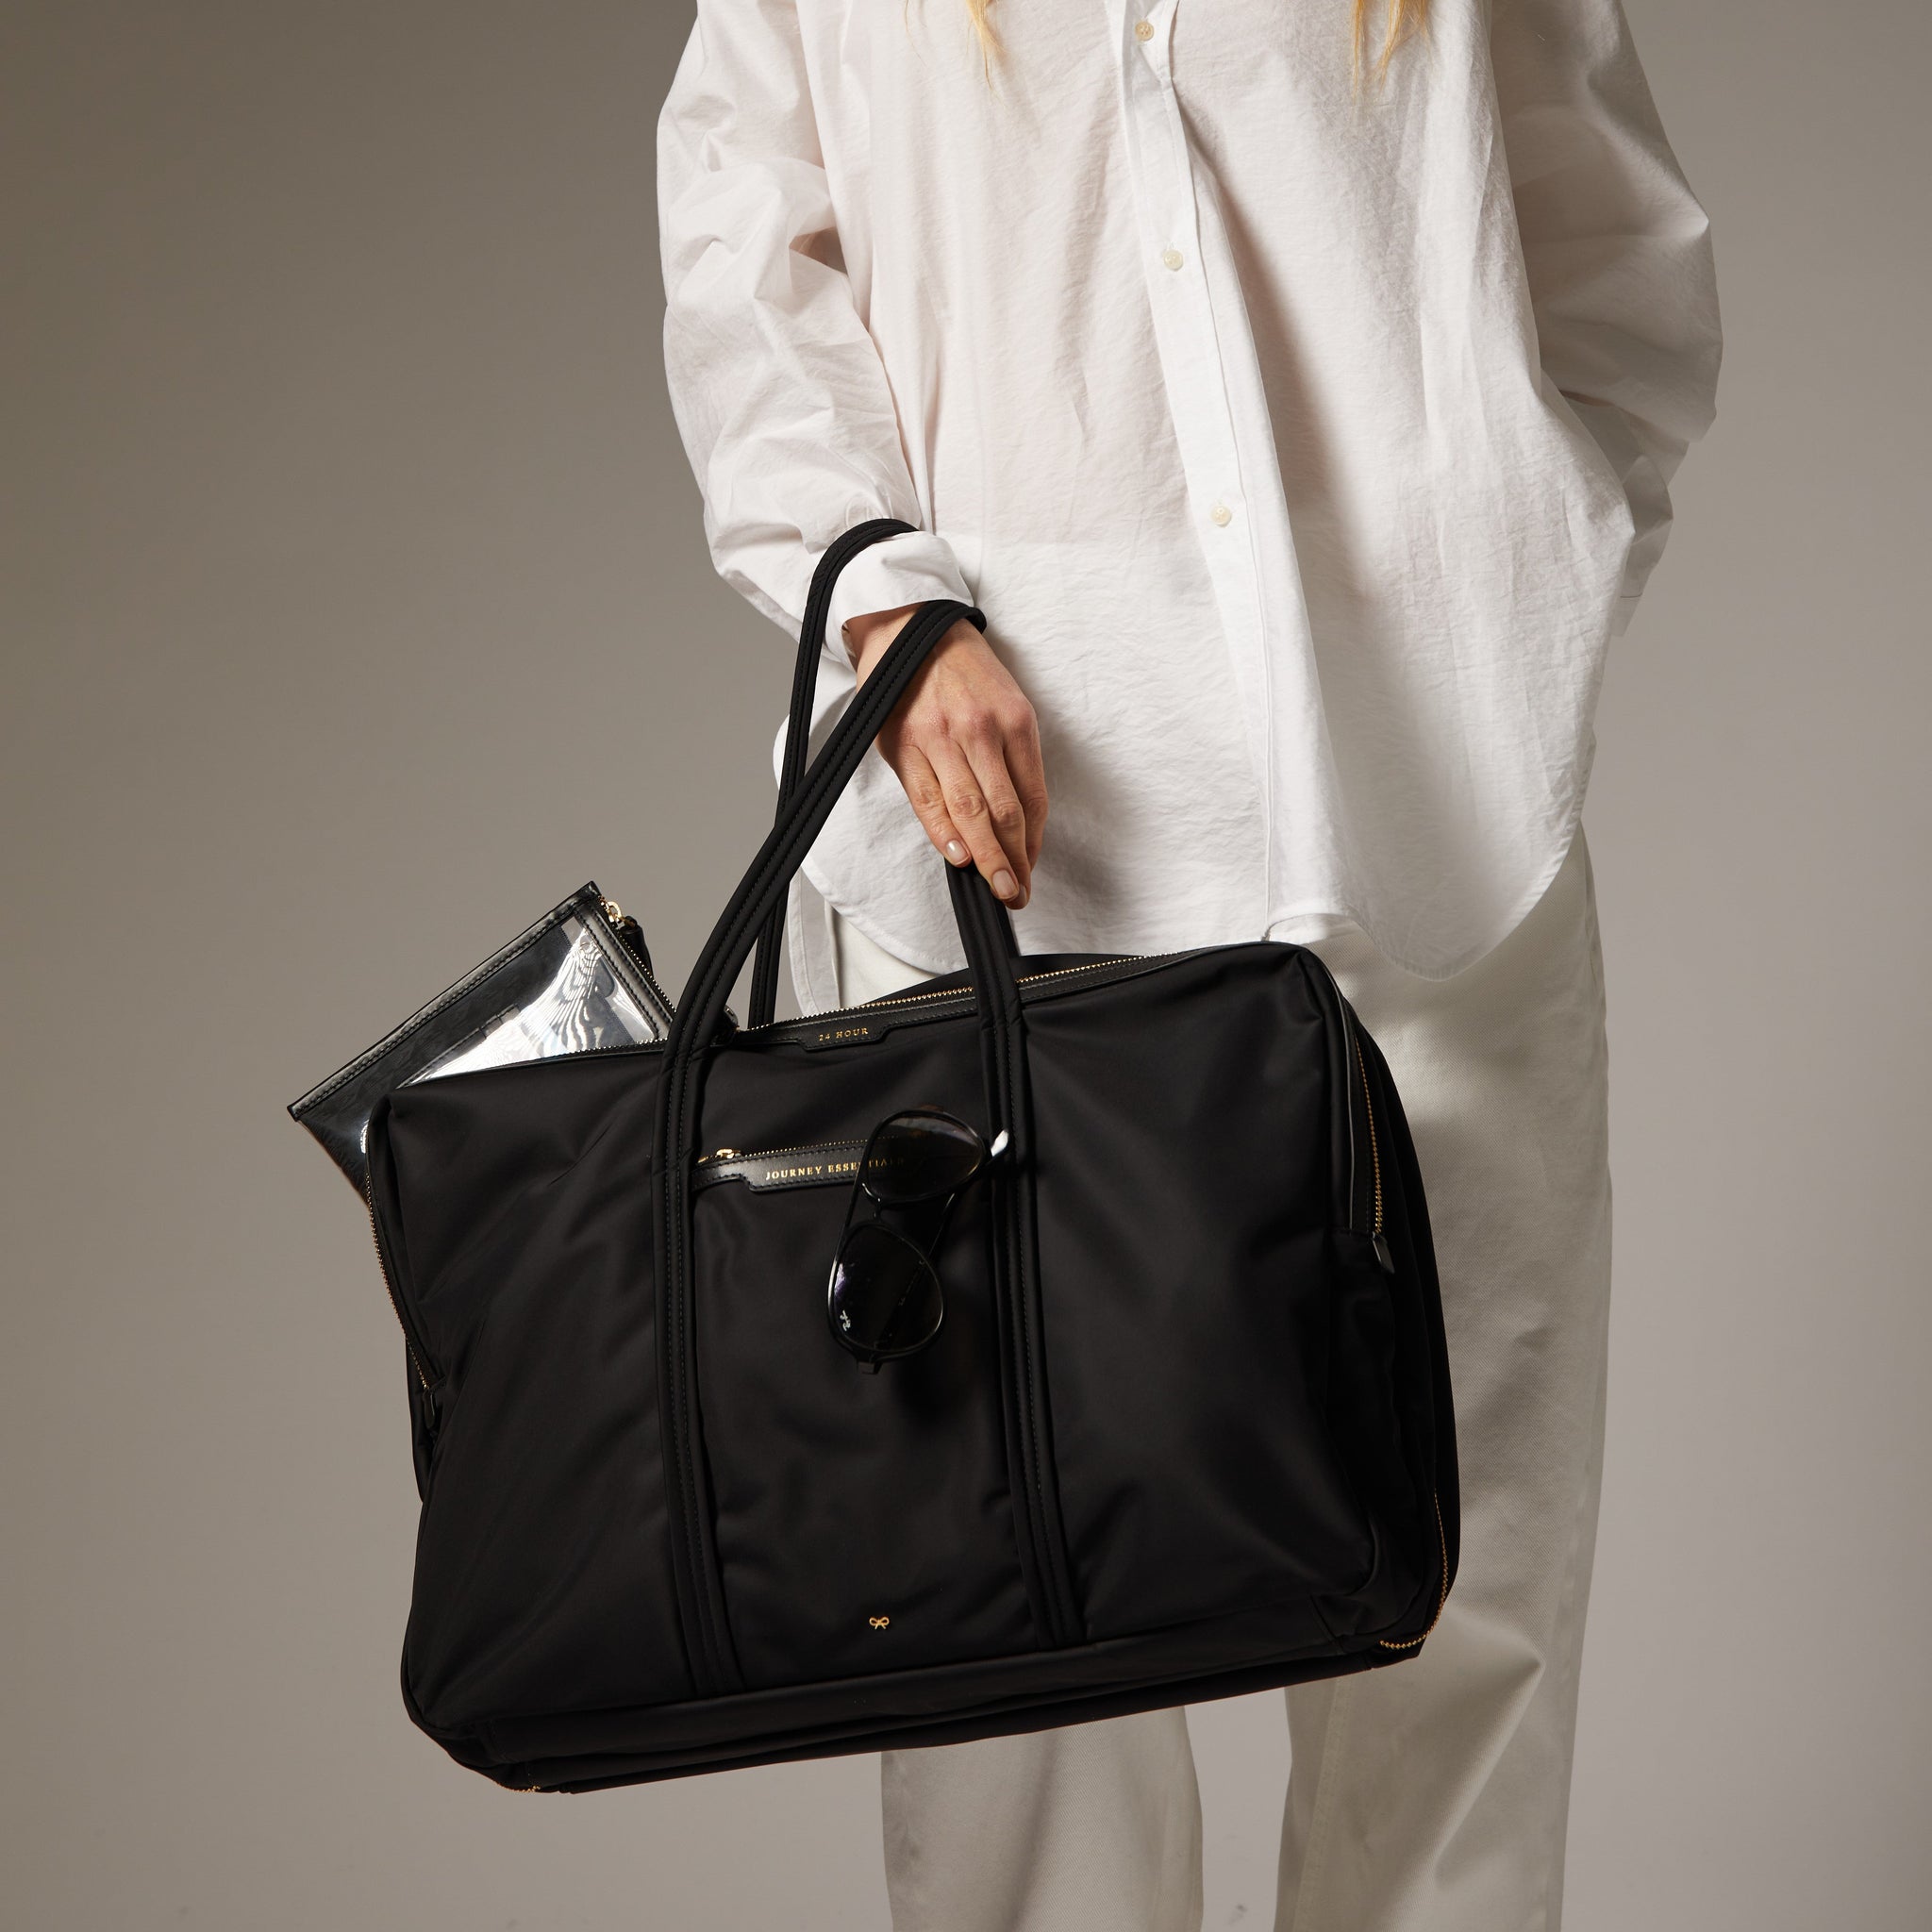 「24 Hour」バッグ -

                  
                    Recycled Nylon with PU in Black -
                  

                  Anya Hindmarch JP
